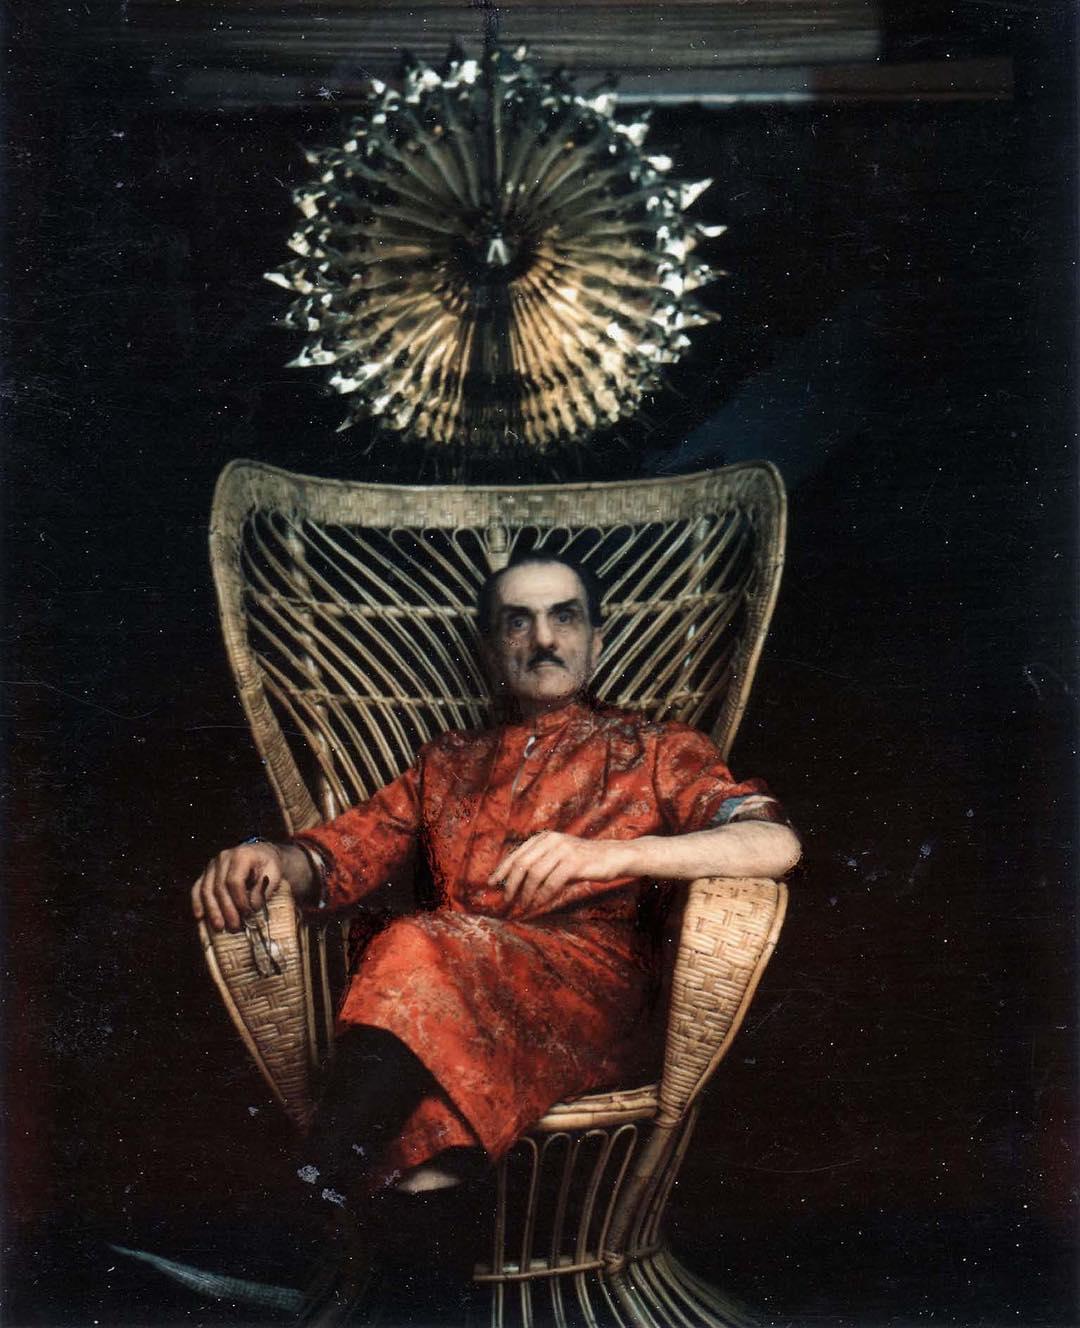 

Famous Italian artist and designer Carlo Mollino used this type of chair many times in his erotic Polaroids with photographed models sitting on this model of Rattan chair
Photo 2 is Carlo Mollino himself sitting in this model chair.


The